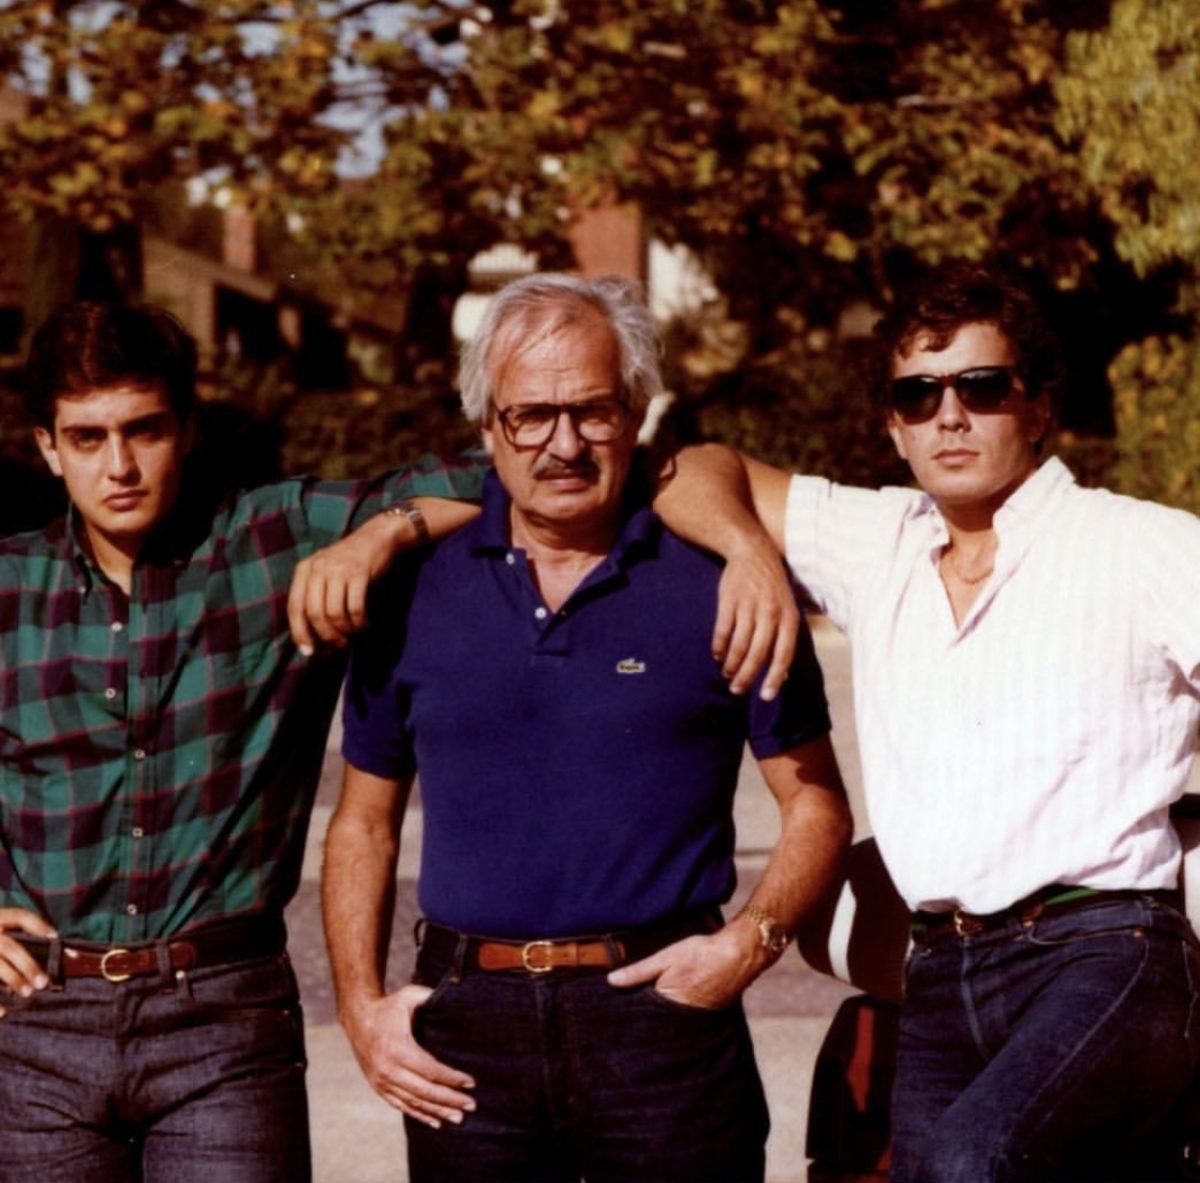 The Daou brothers with their father in the 1980s